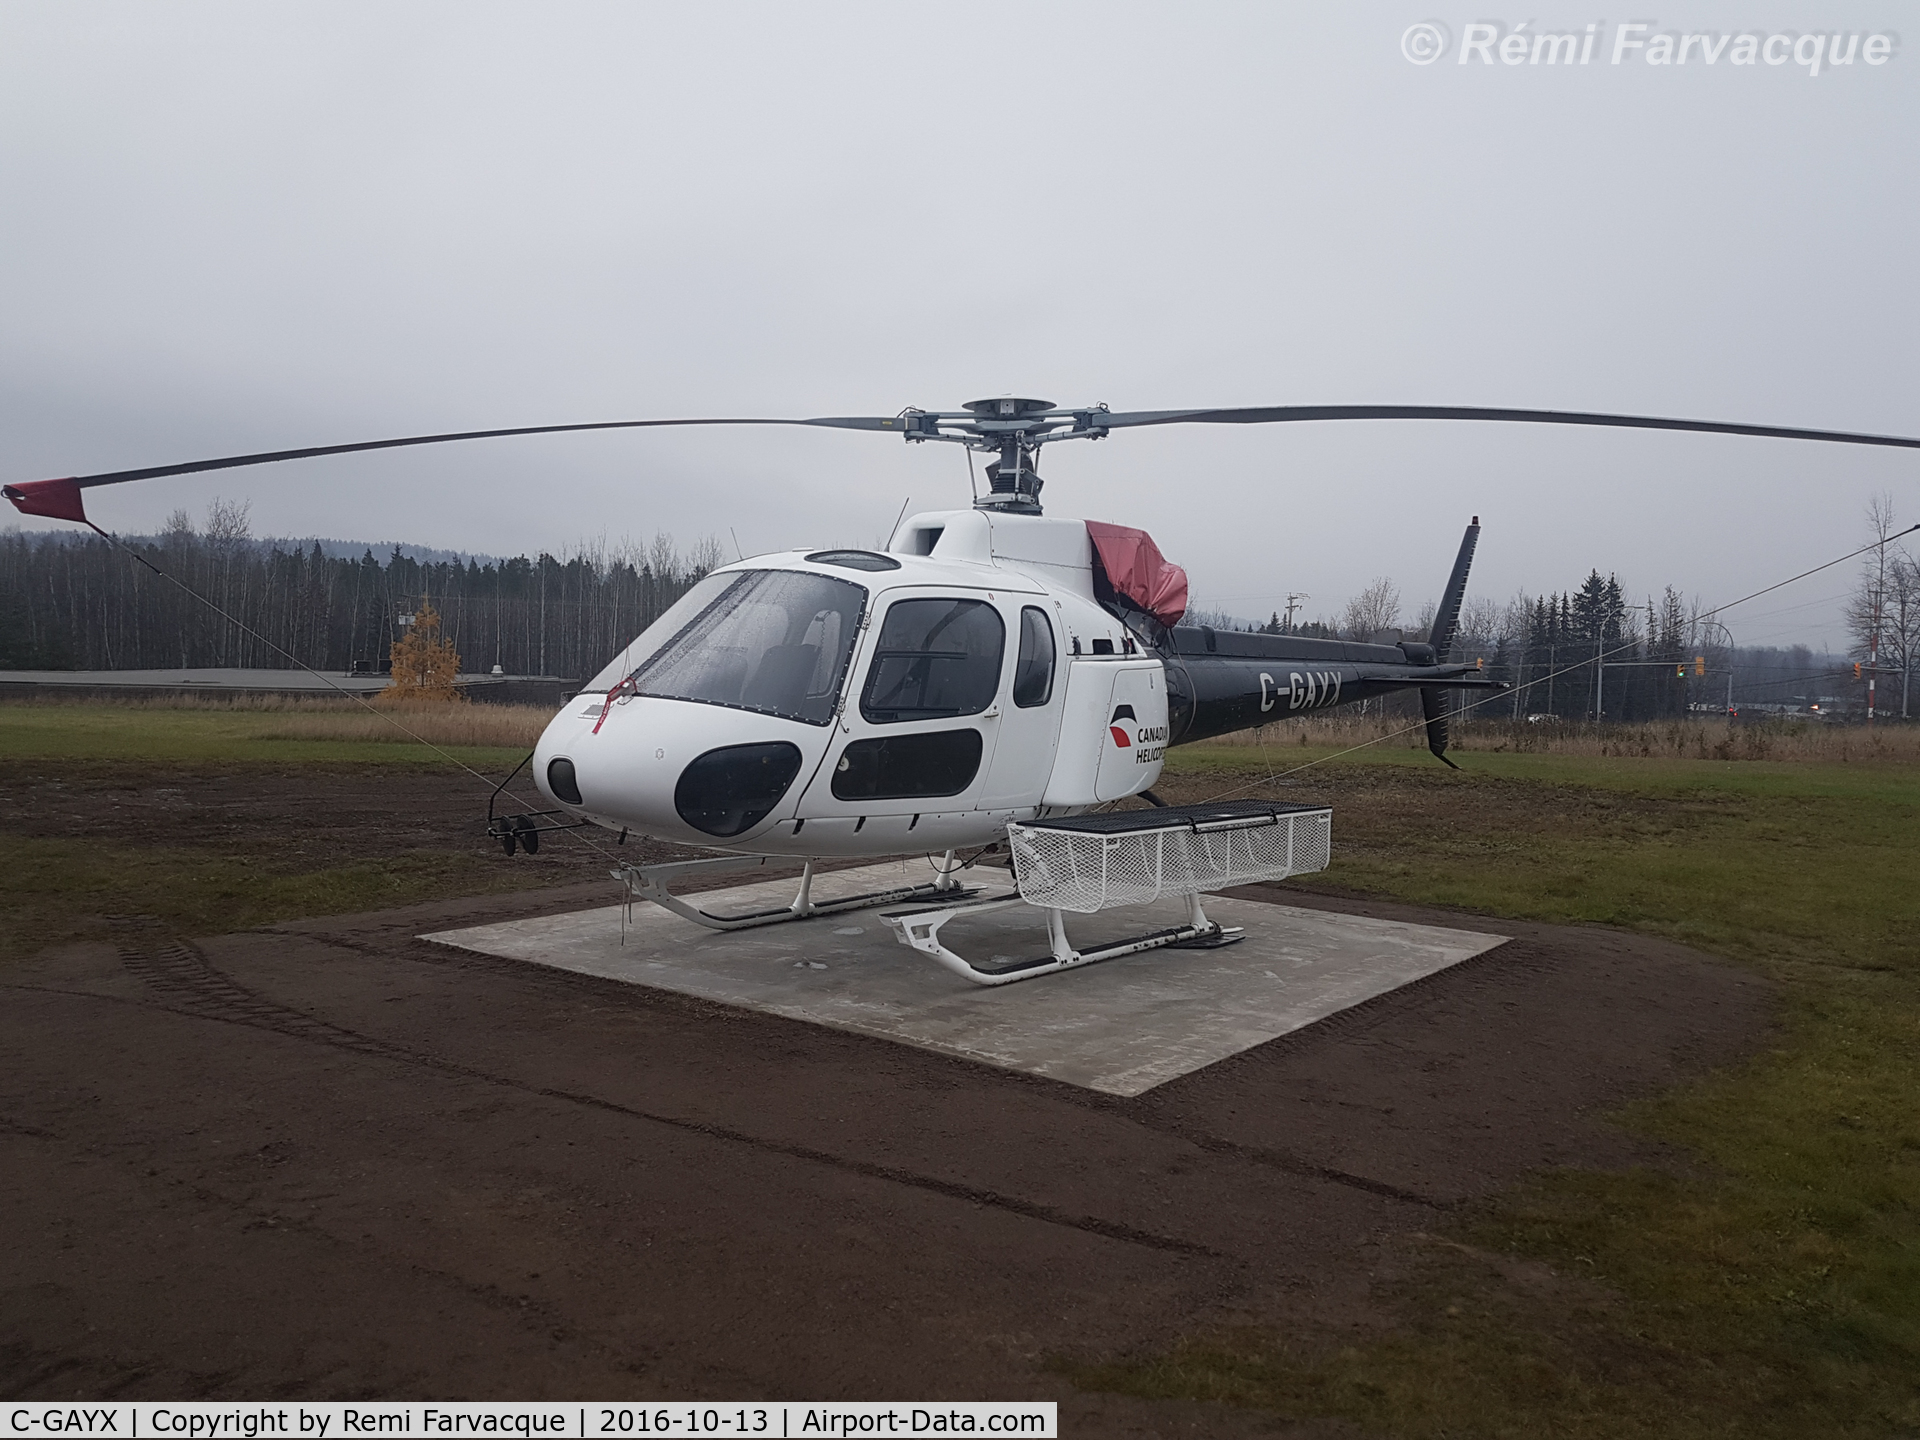 C-GAYX, 1981 Aerospatiale AS-350BA Ecureuil C/N 1179, Parked at Canadian Helicopters base in Smithrs (not airport).